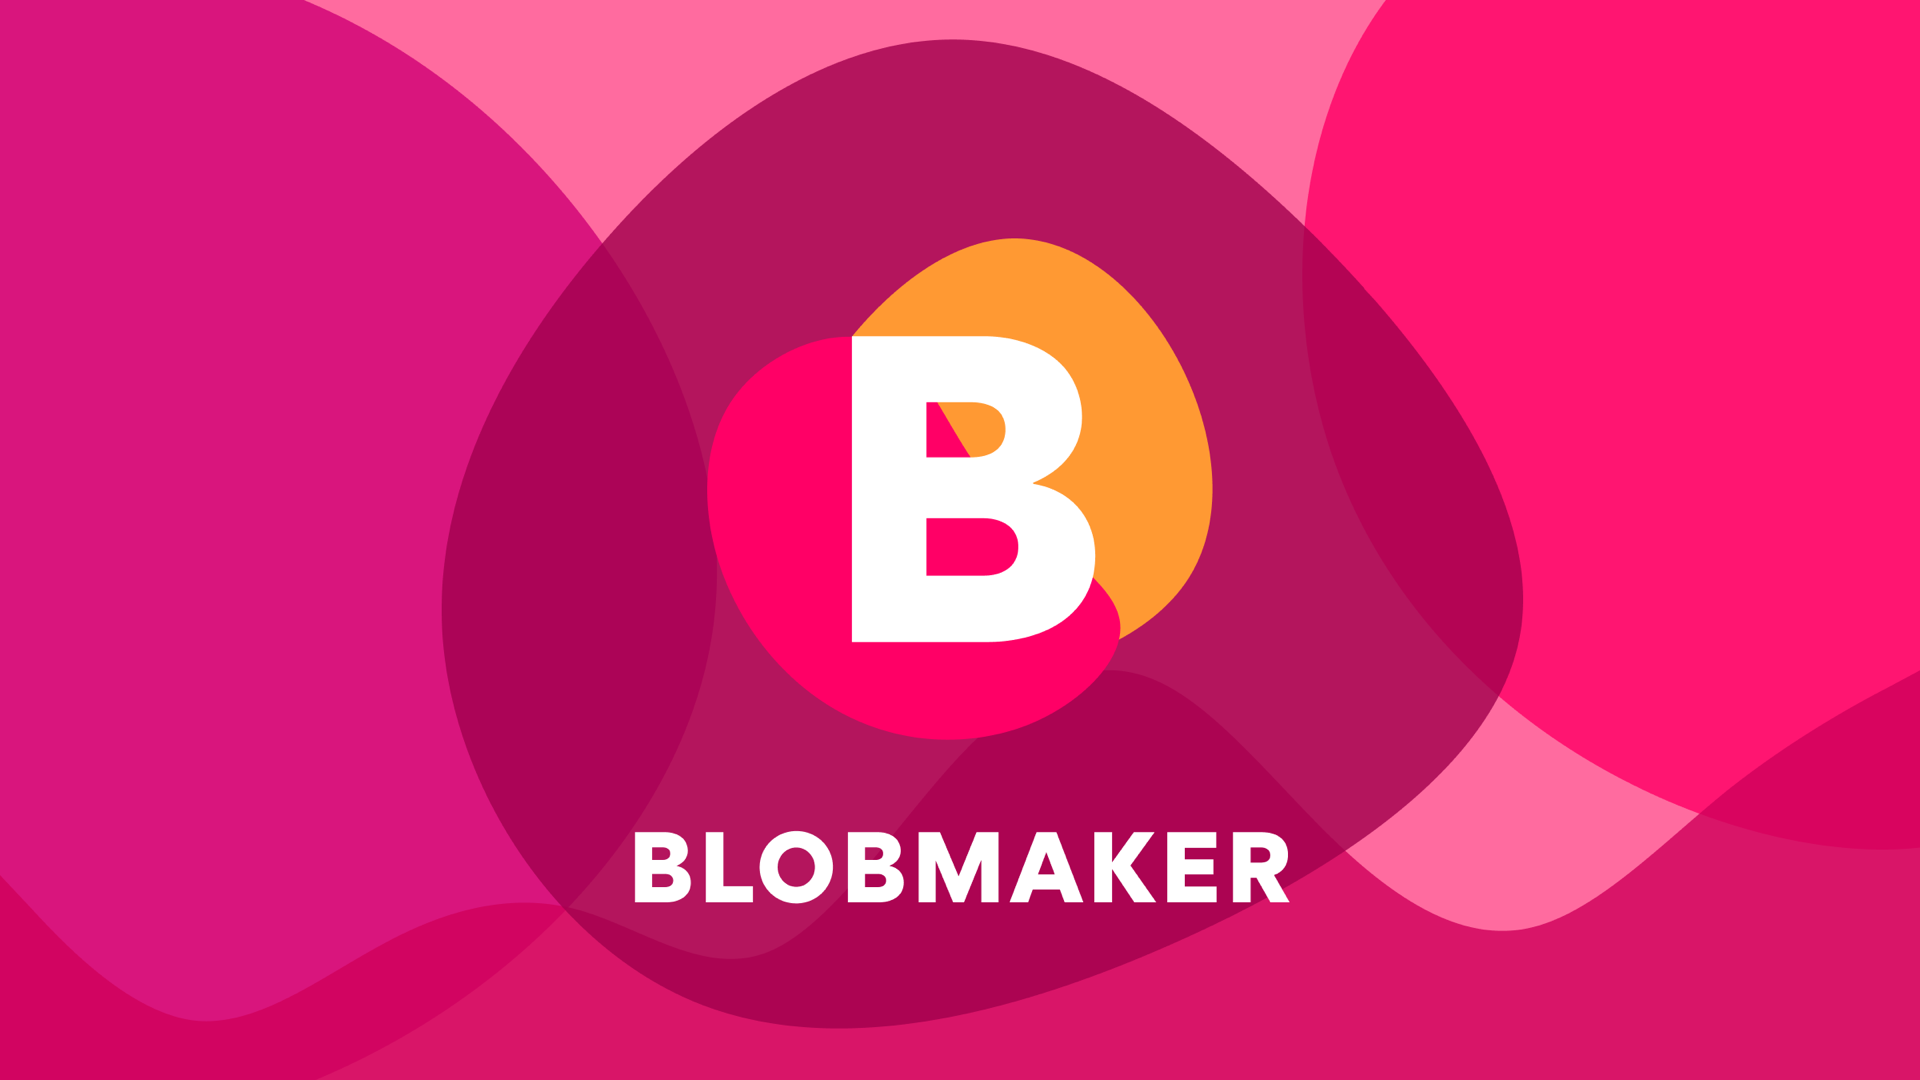 Blobmaker Dev Tools To Simplifying Your Coding Journey